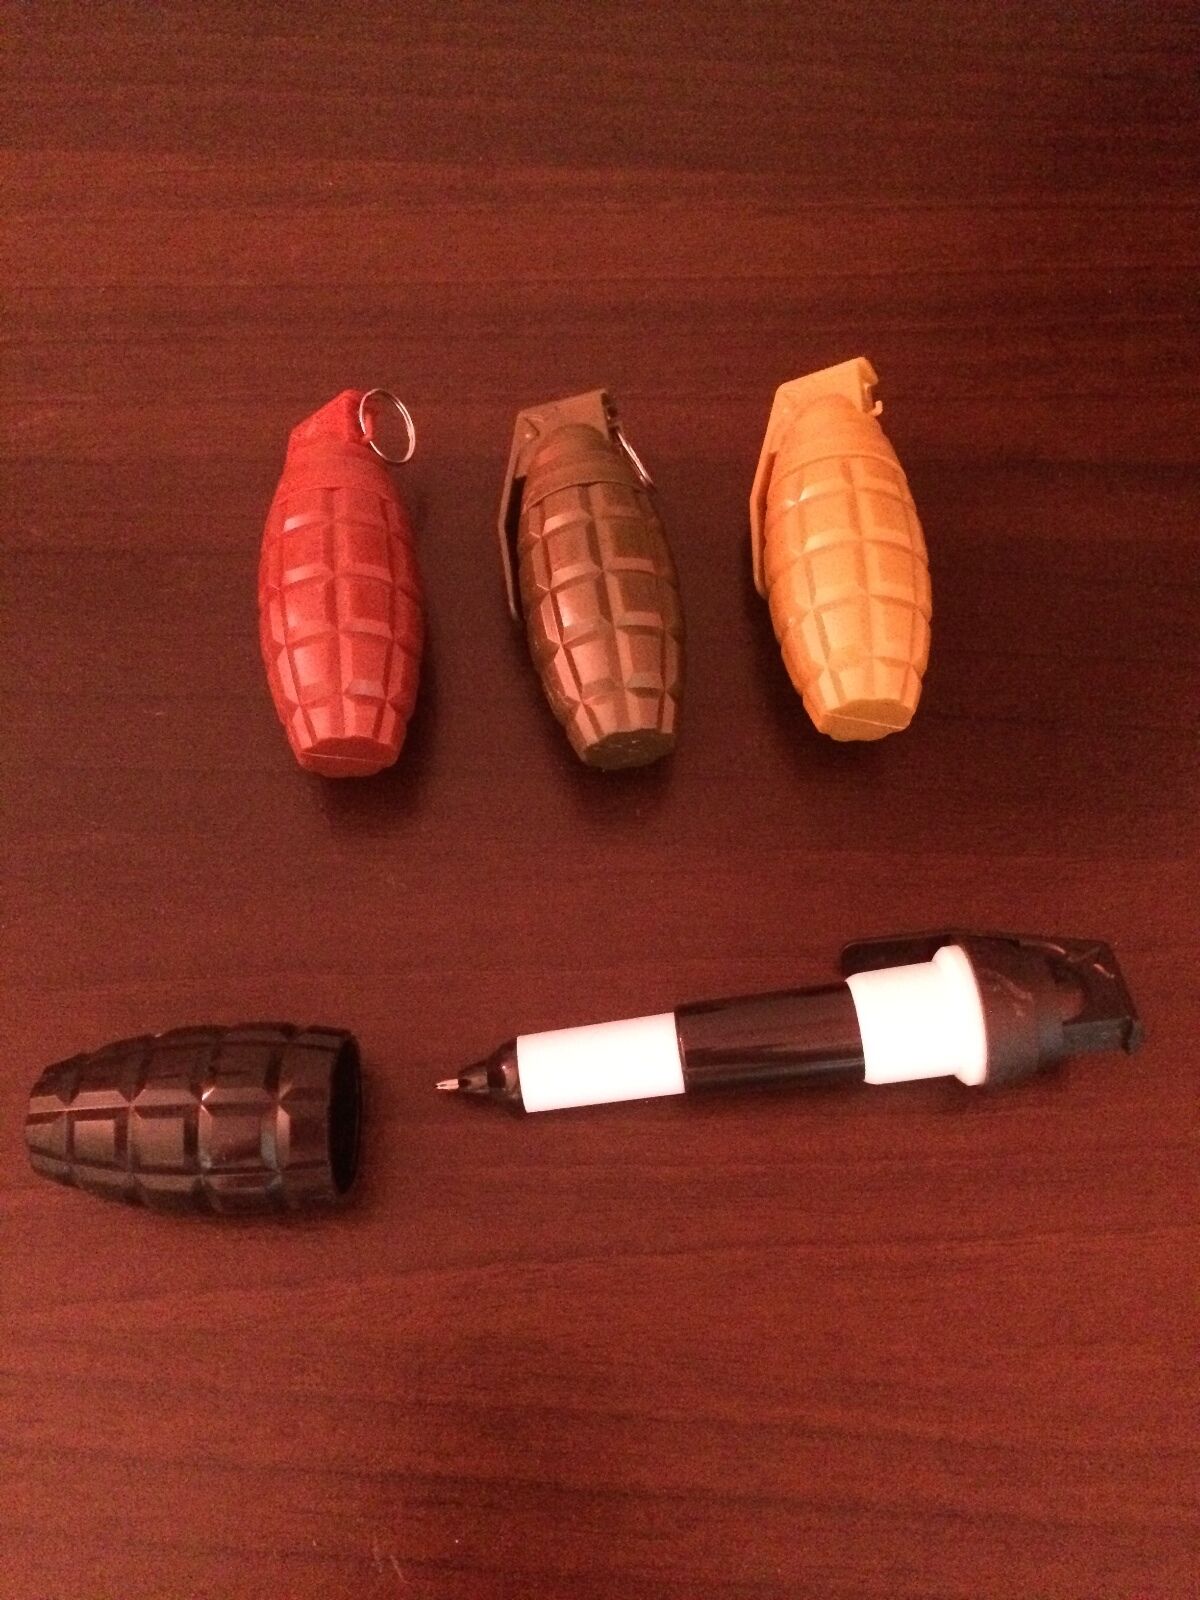 4 Pens Grenade Funny Military Army Gift New